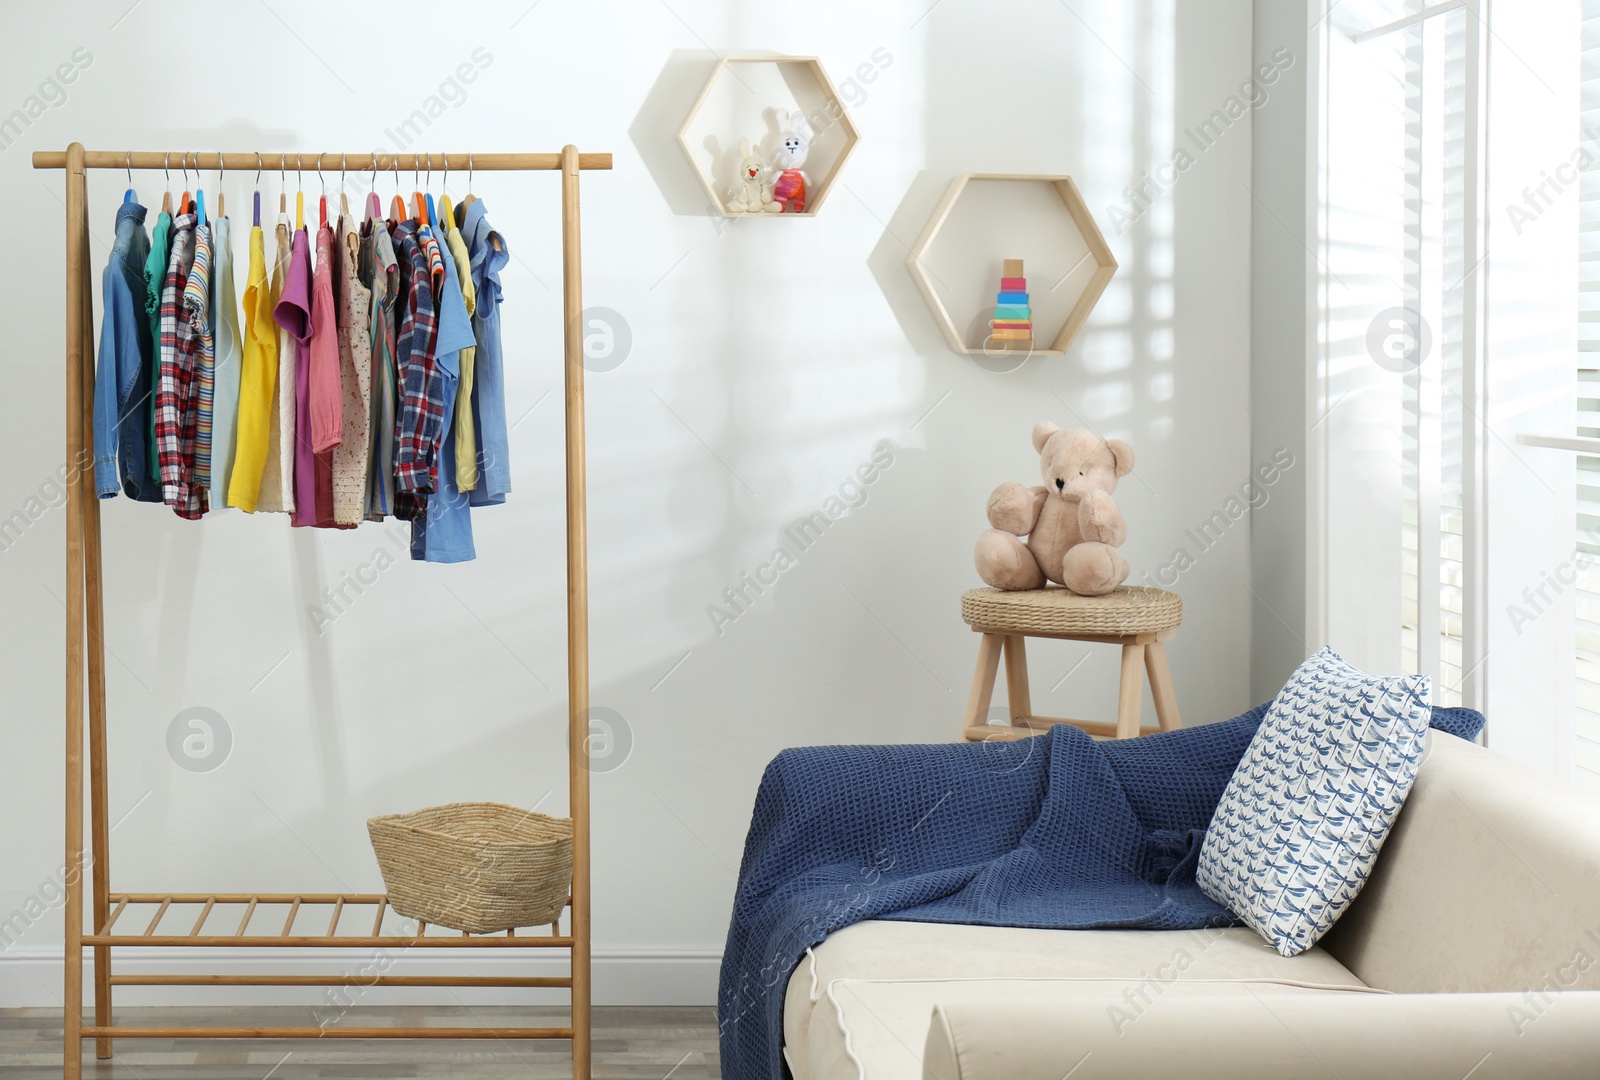 Photo of Different child's clothes hanging on rack in living room